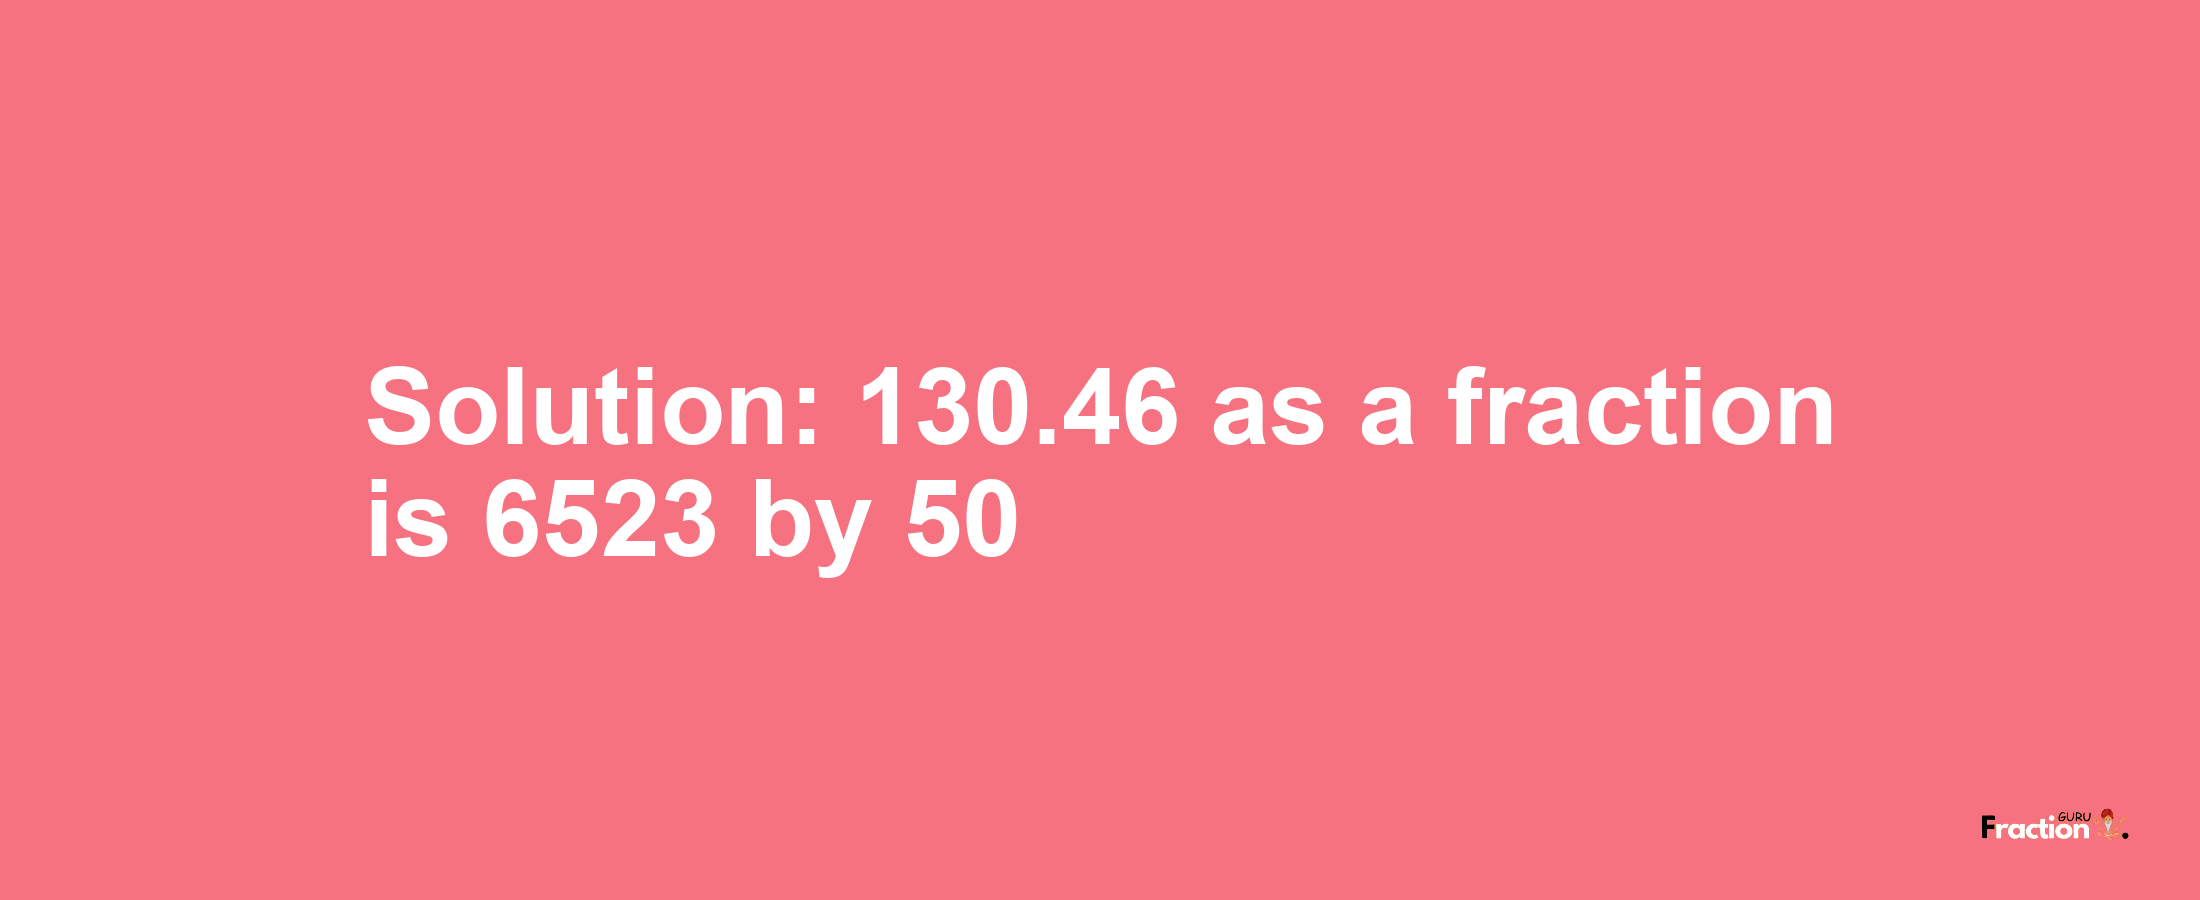 Solution:130.46 as a fraction is 6523/50